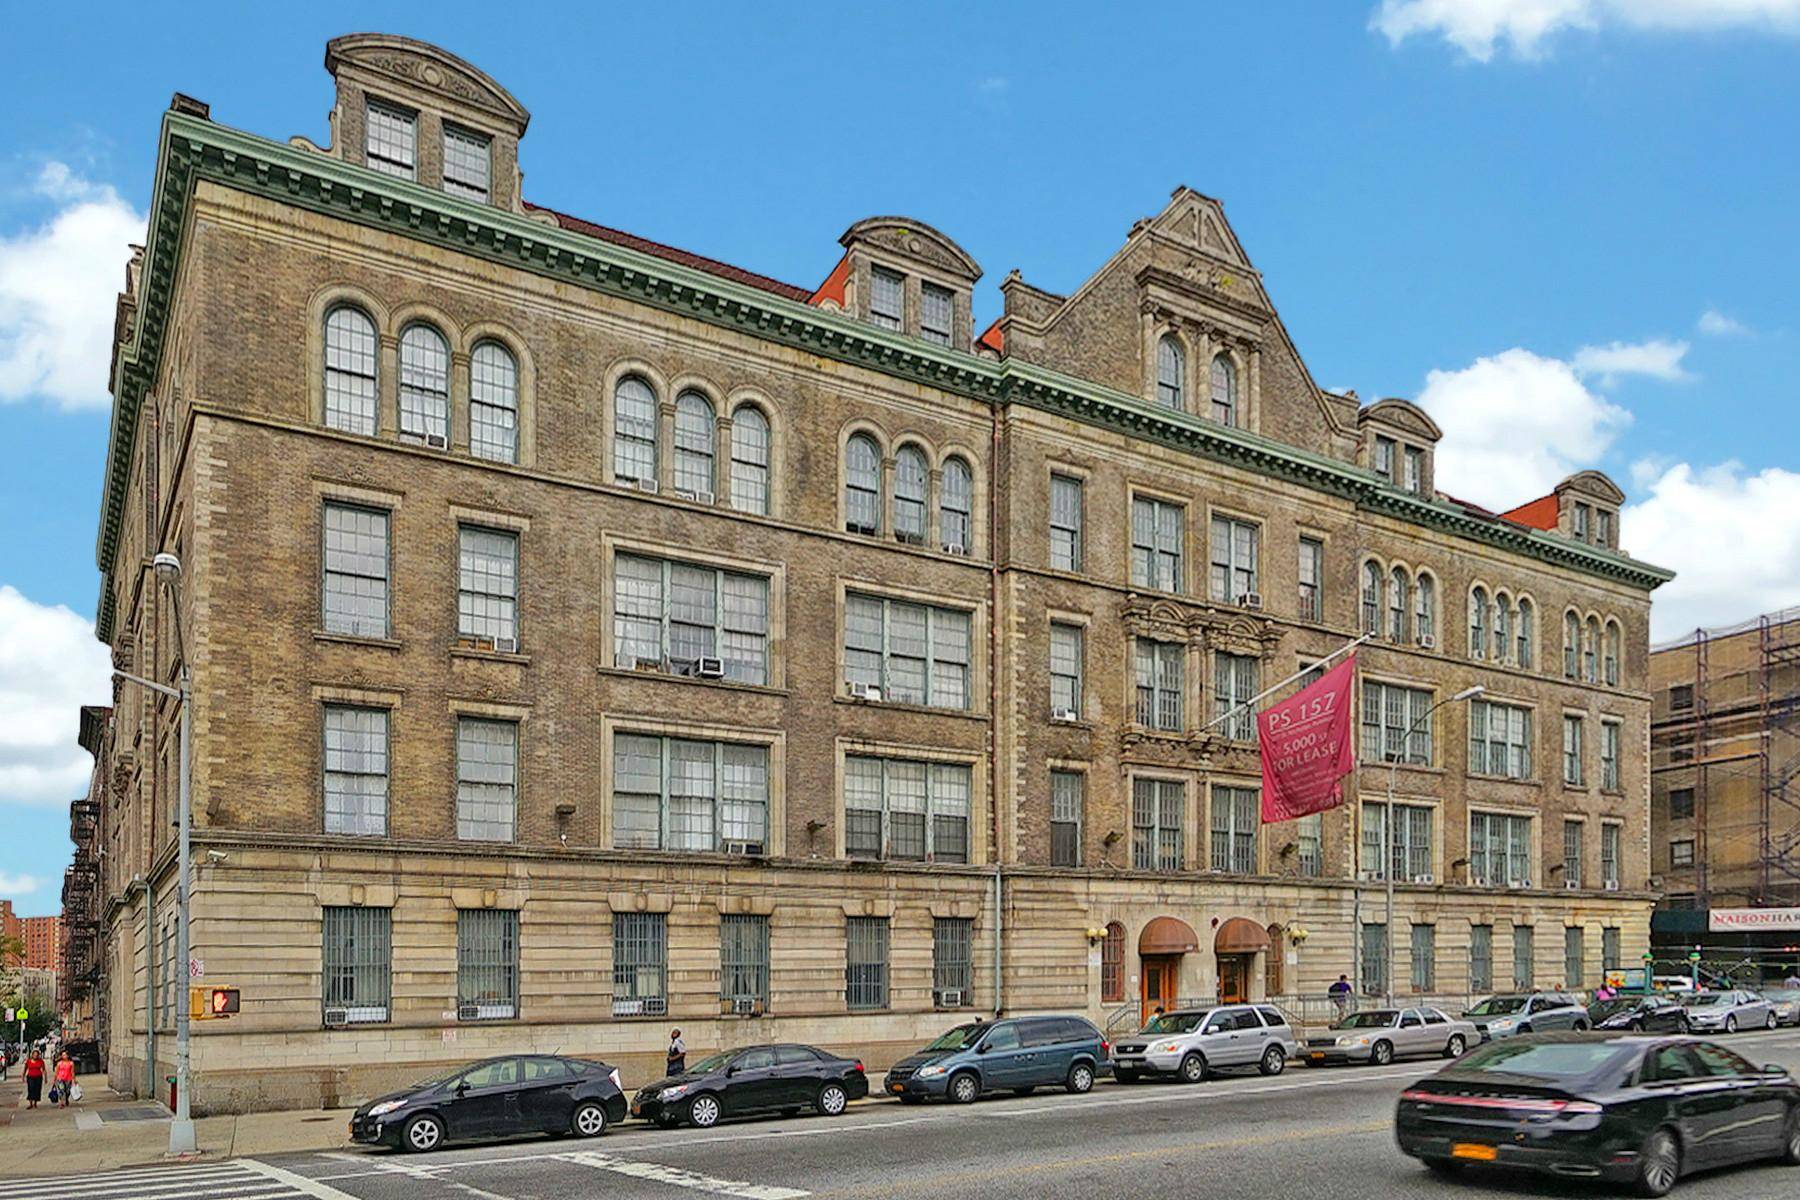 3 Bed, 2 Bath Rare vacancy in public school building converted to residential apartments !